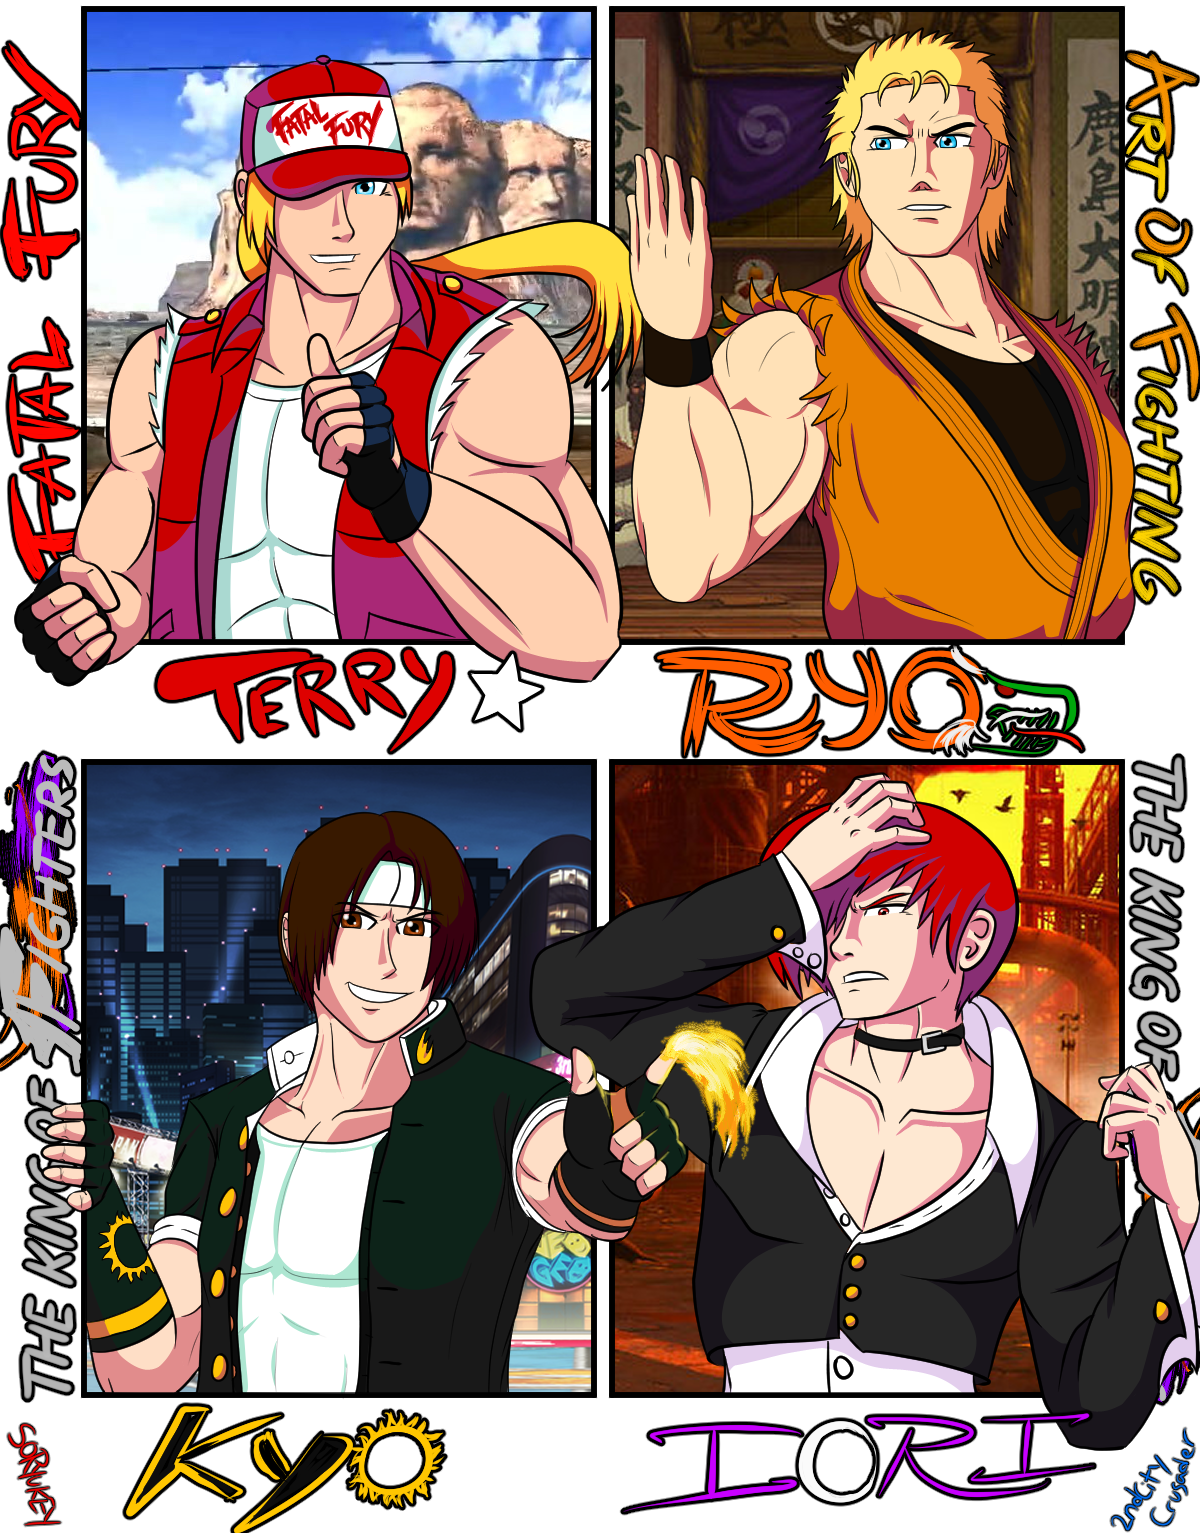 King of Fighters - Teams of 2 Concept by 0rcryst on DeviantArt